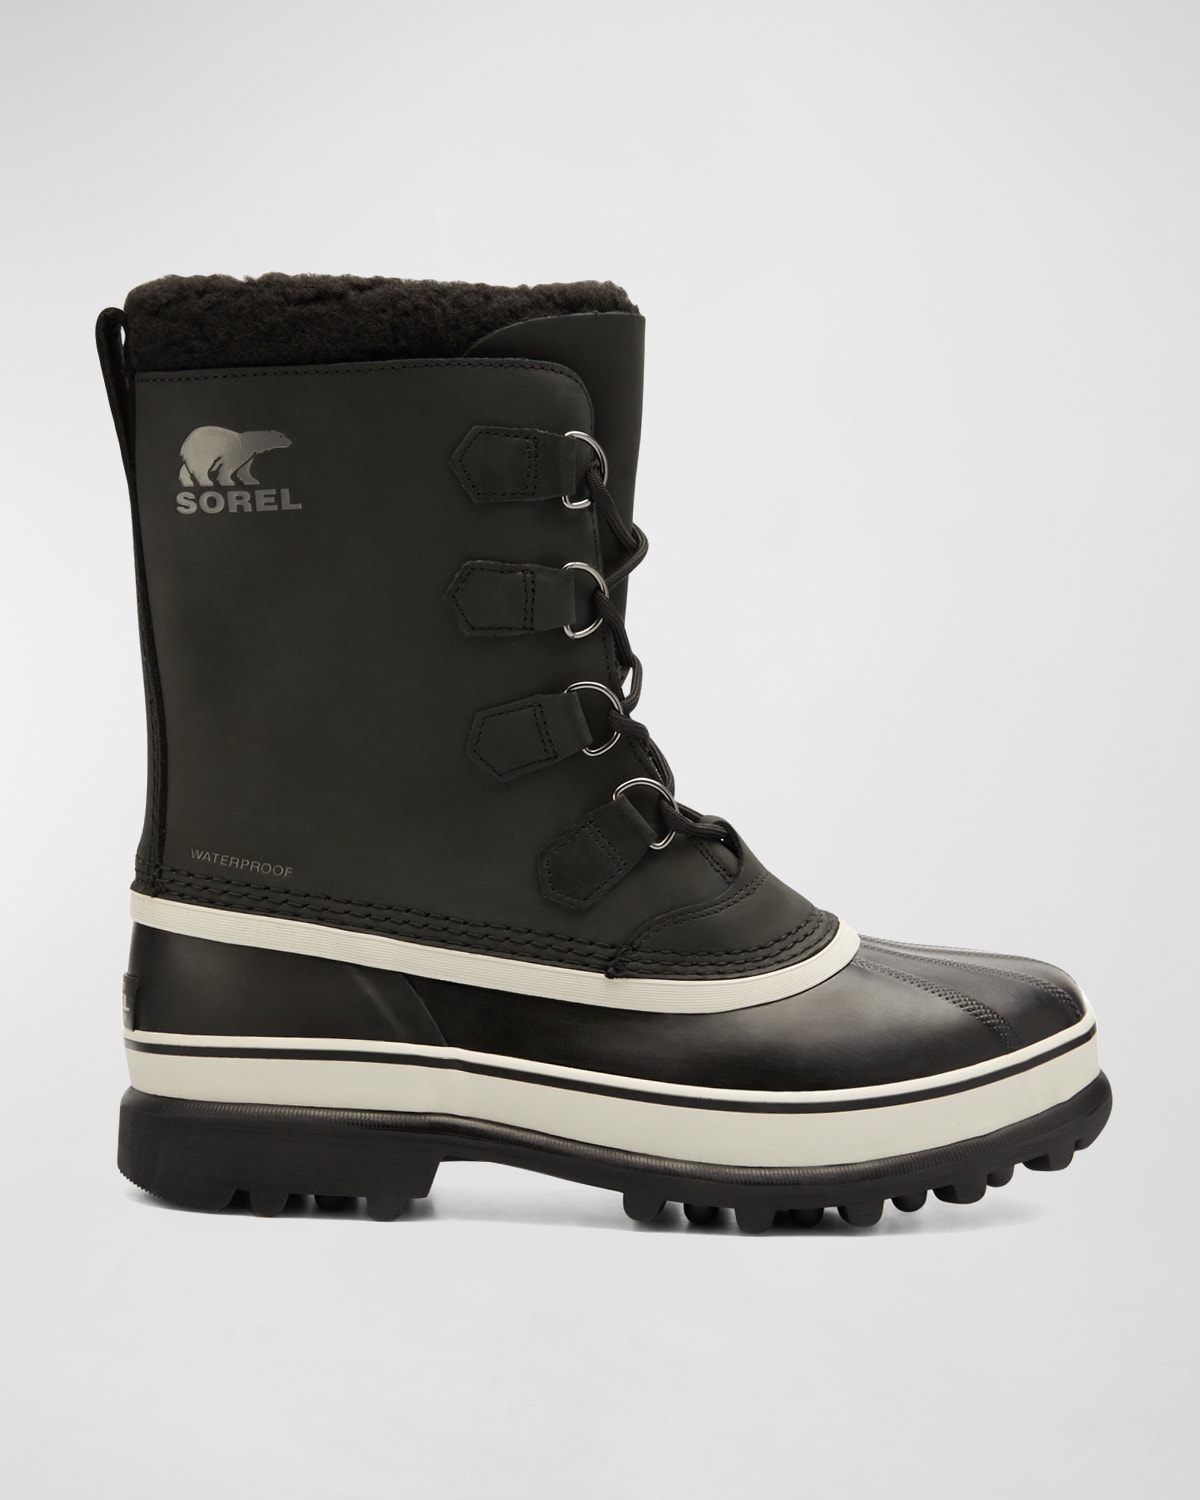 Men's Caribou Waterproof Leather Snow Boots